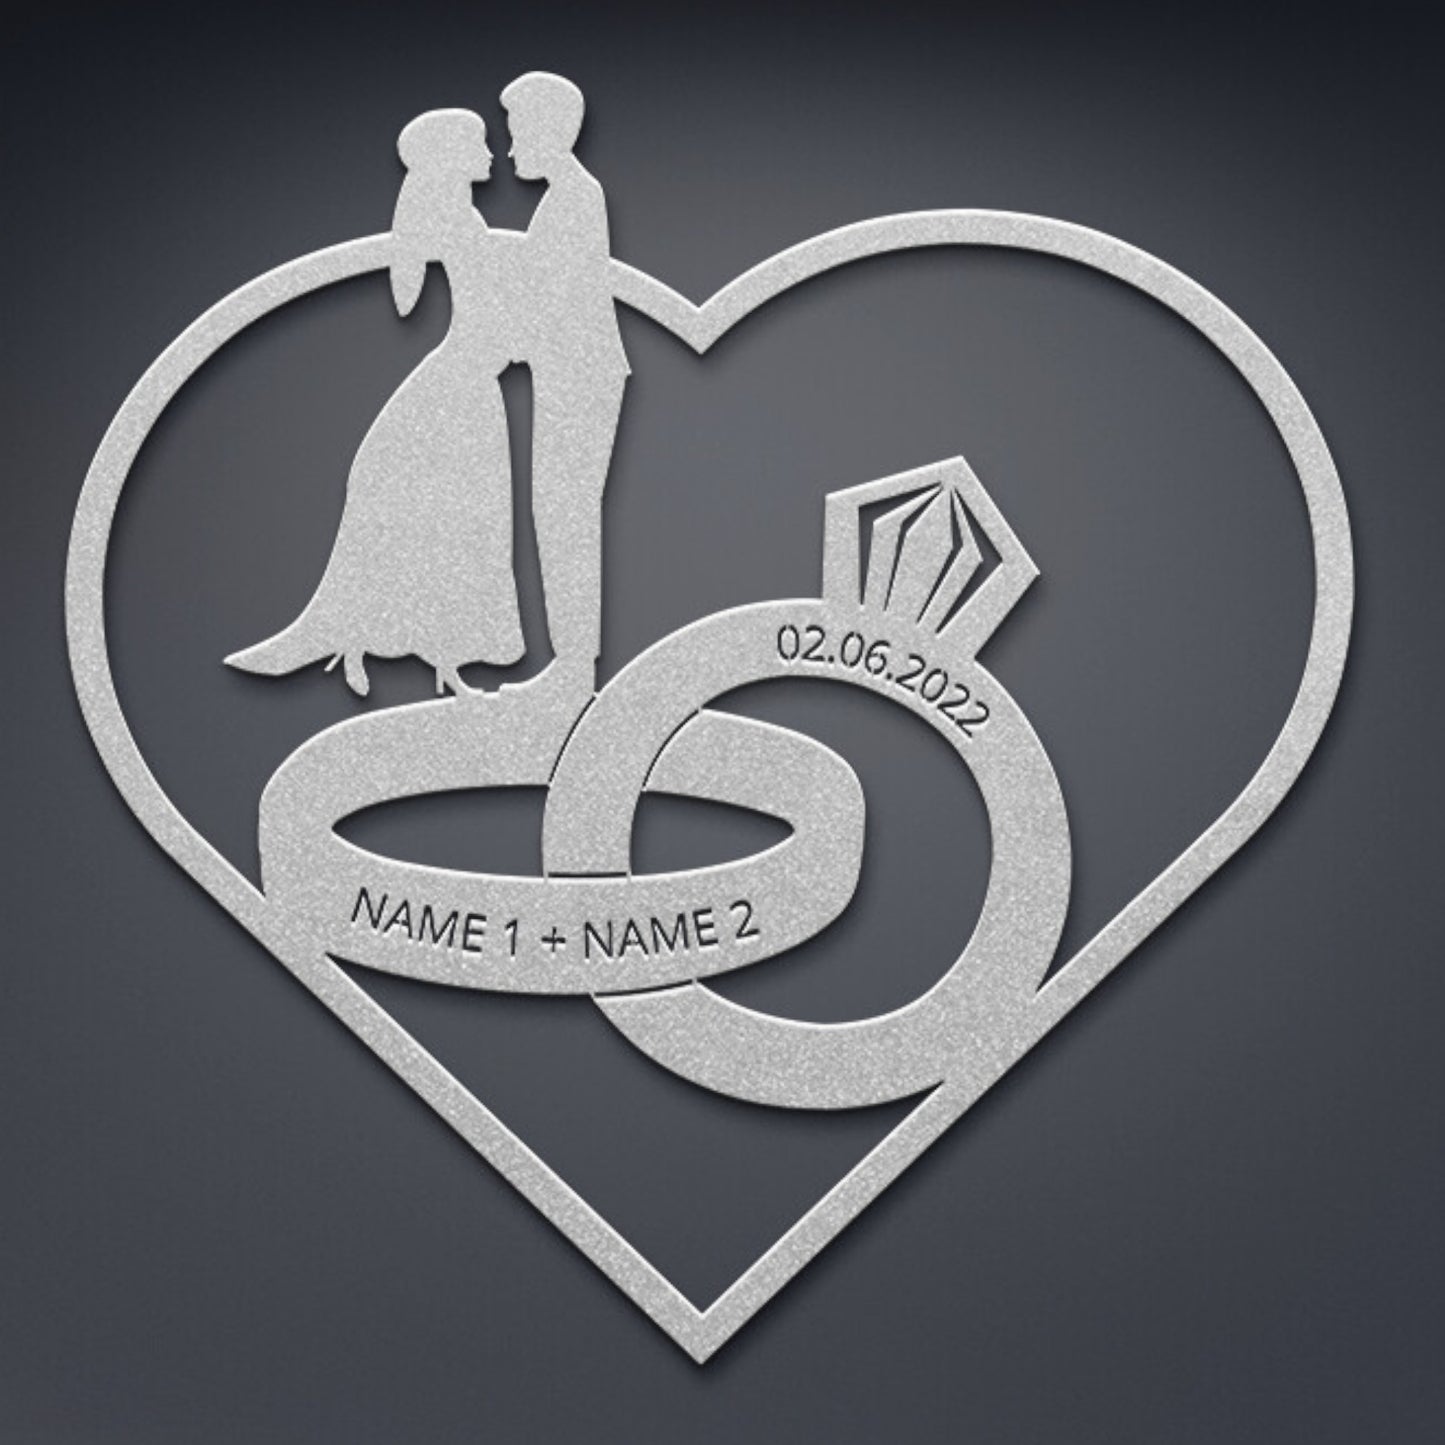 Personalized Rings Of Love Wedding Metal Sign Wall Decor